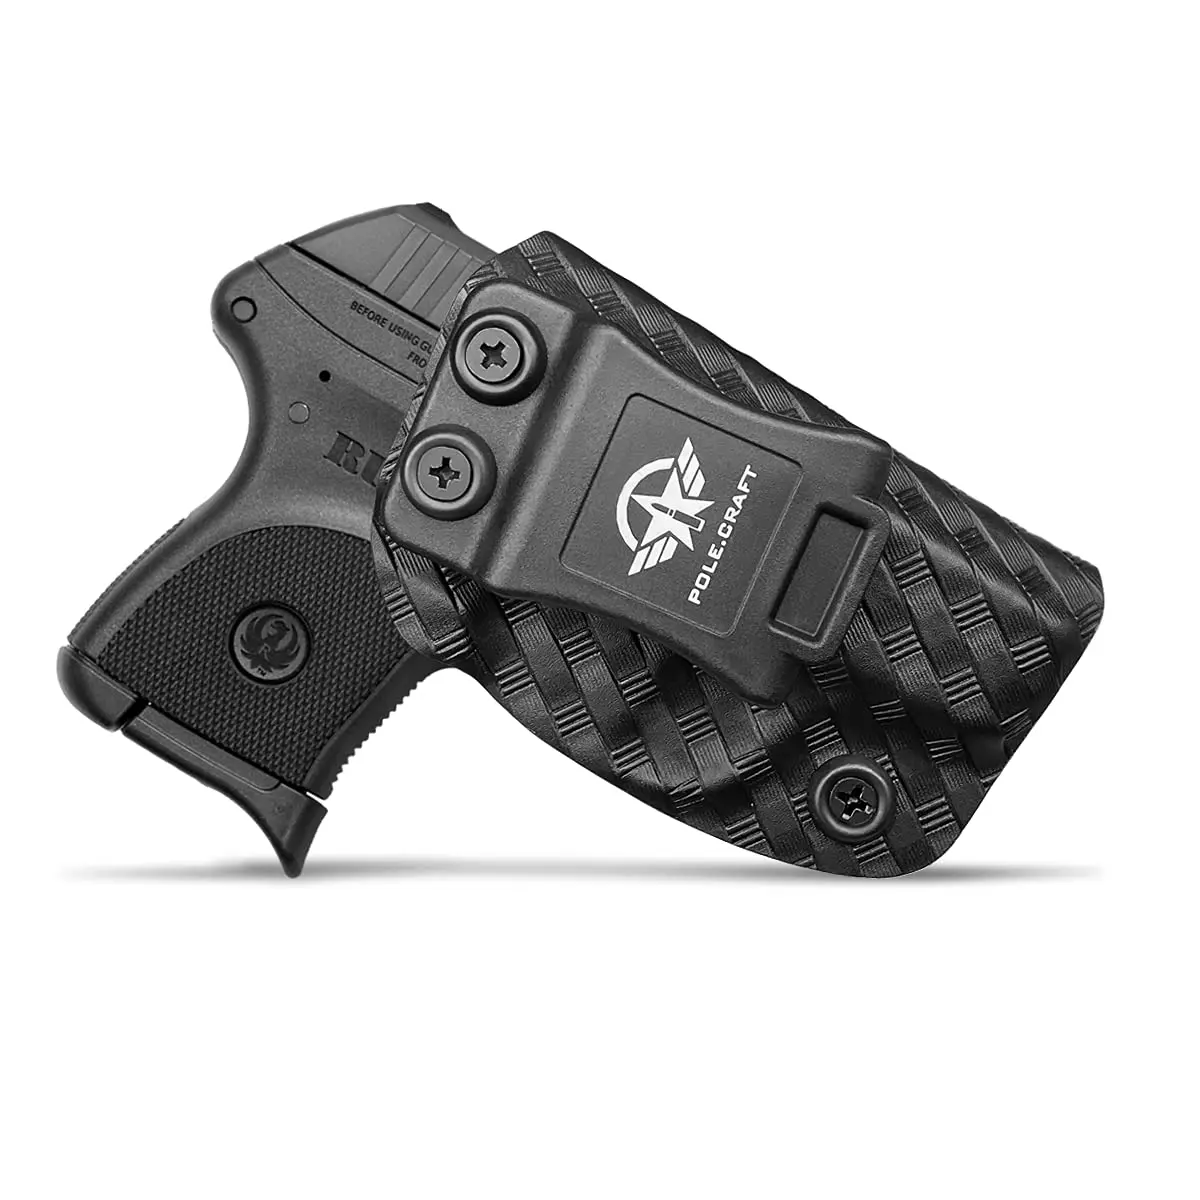 

Ruger LCP 380 Holster, Carbon Fiber Kydex Holster IWB Custom Fit: Ruger LCP 380 Auto Pistol - Inside Waistband Concealed Carry